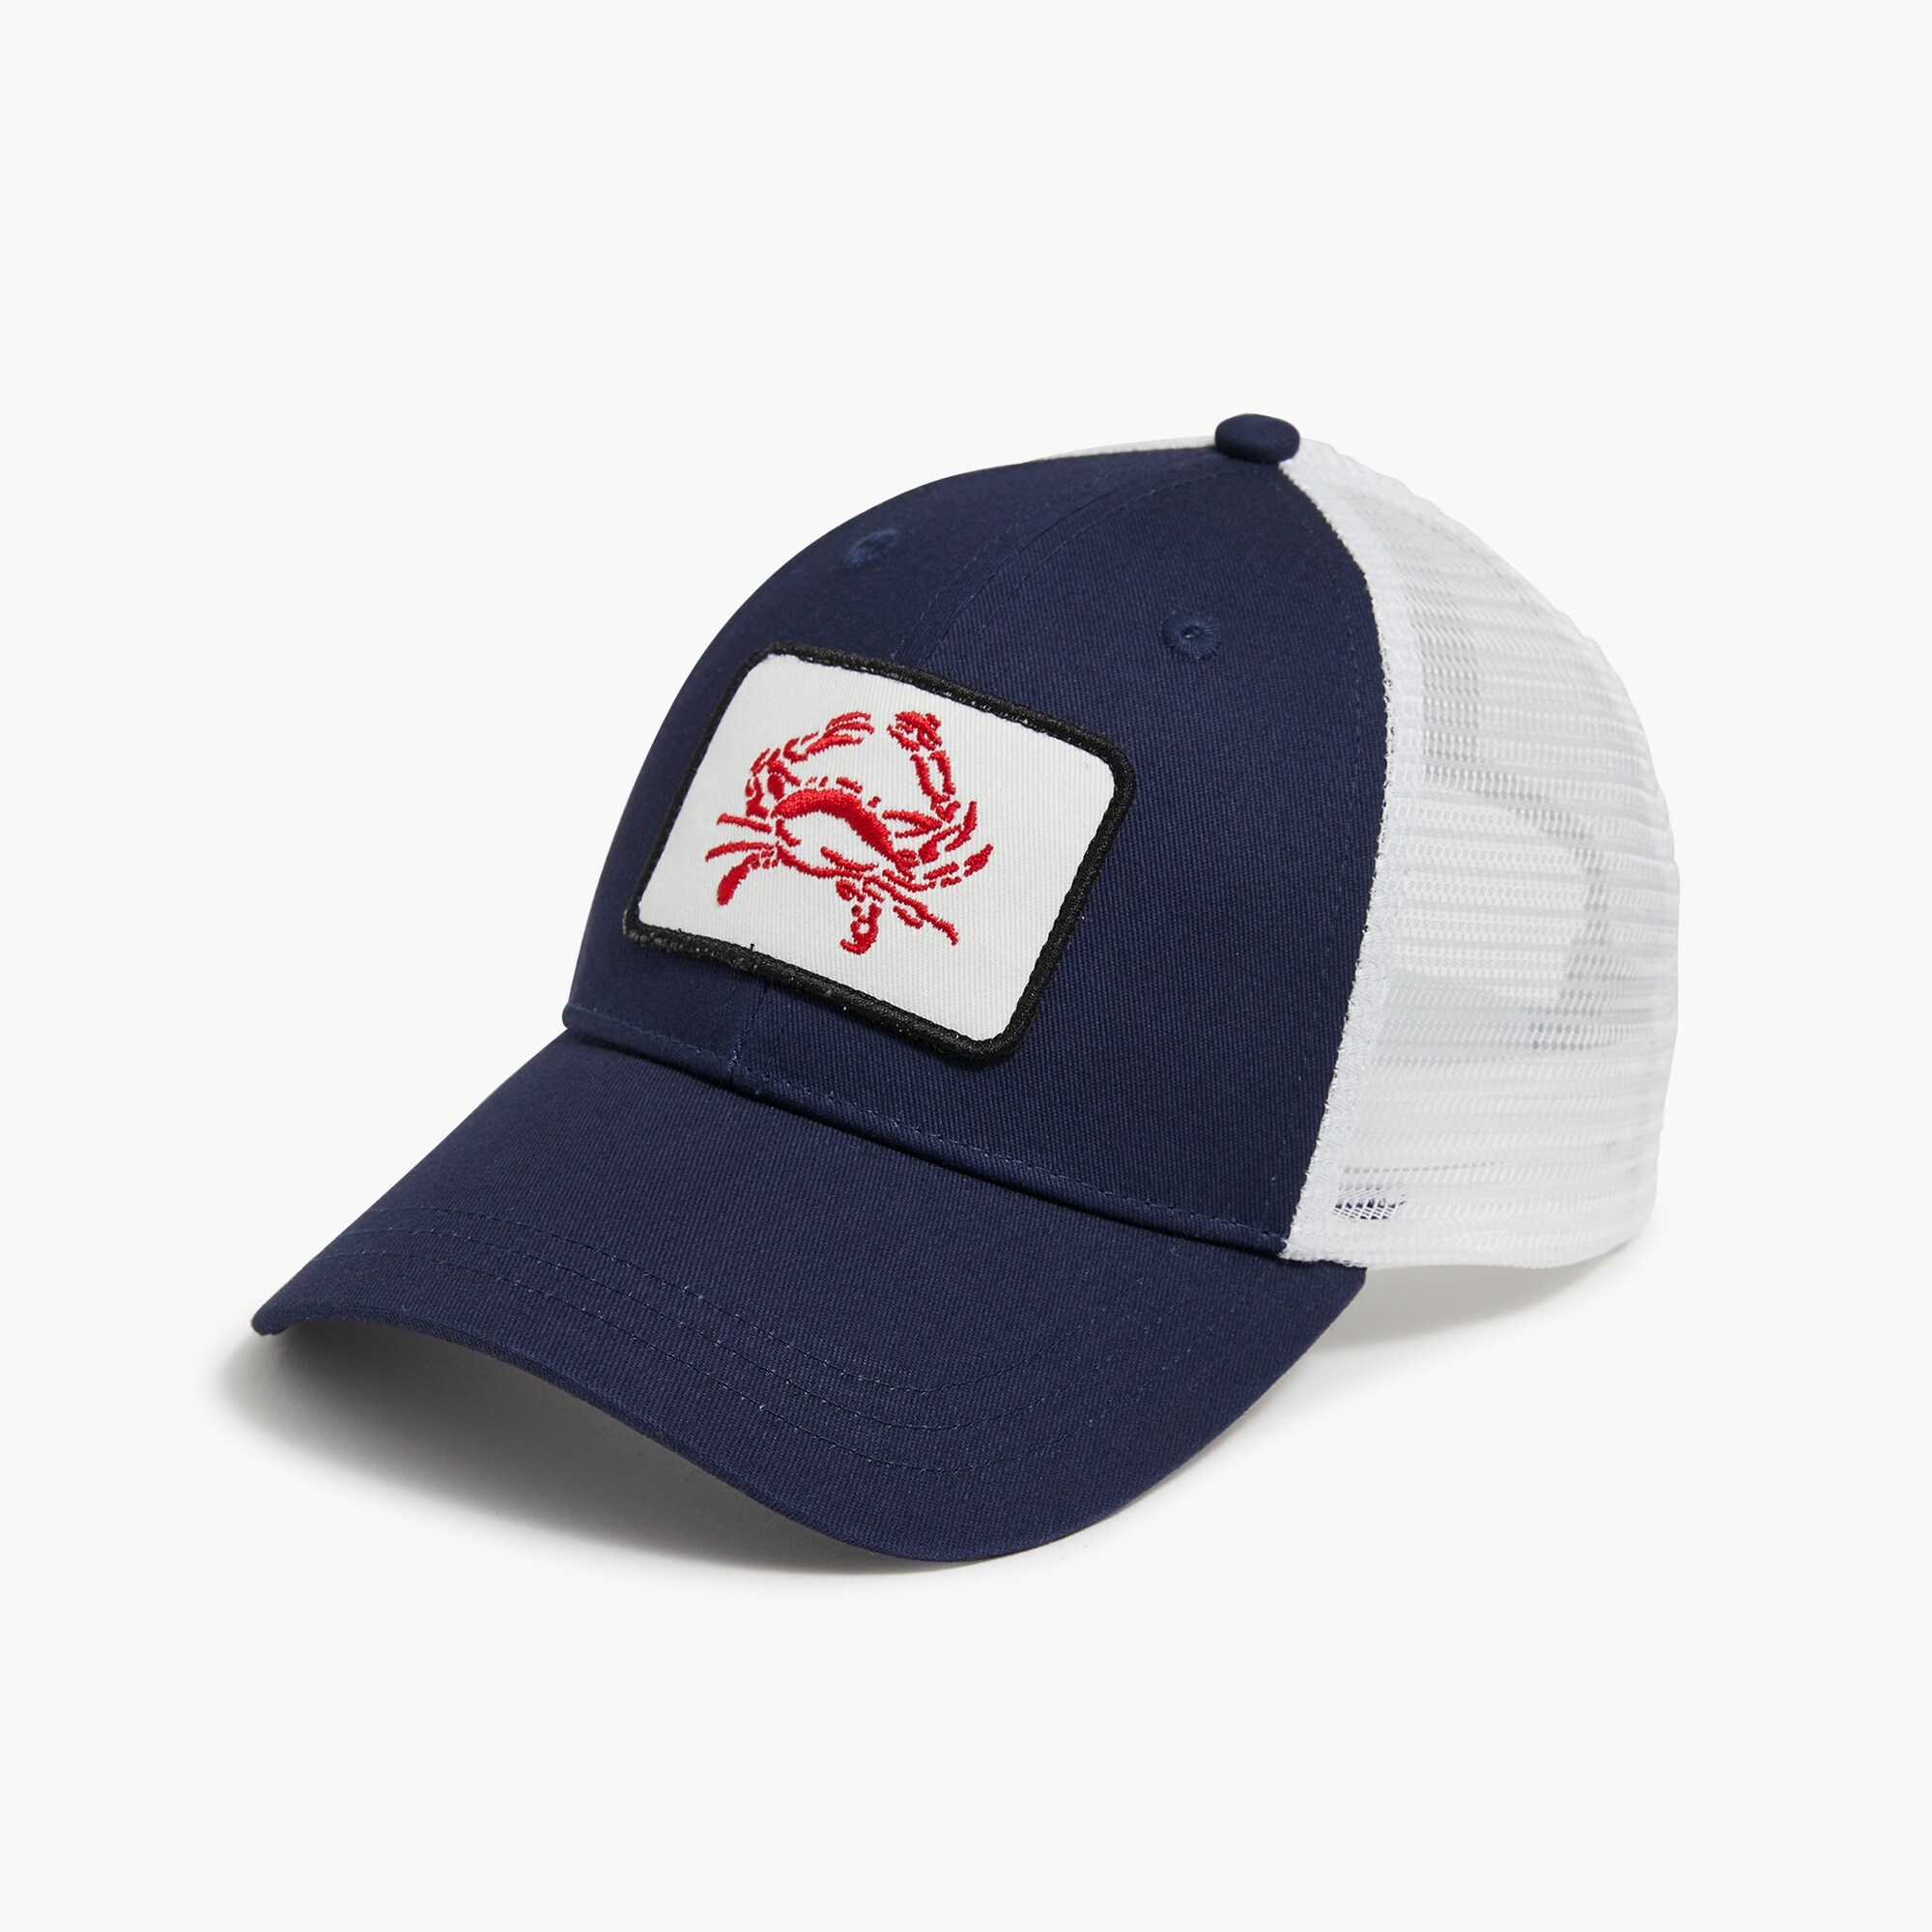 mens Embroidered trucker hat